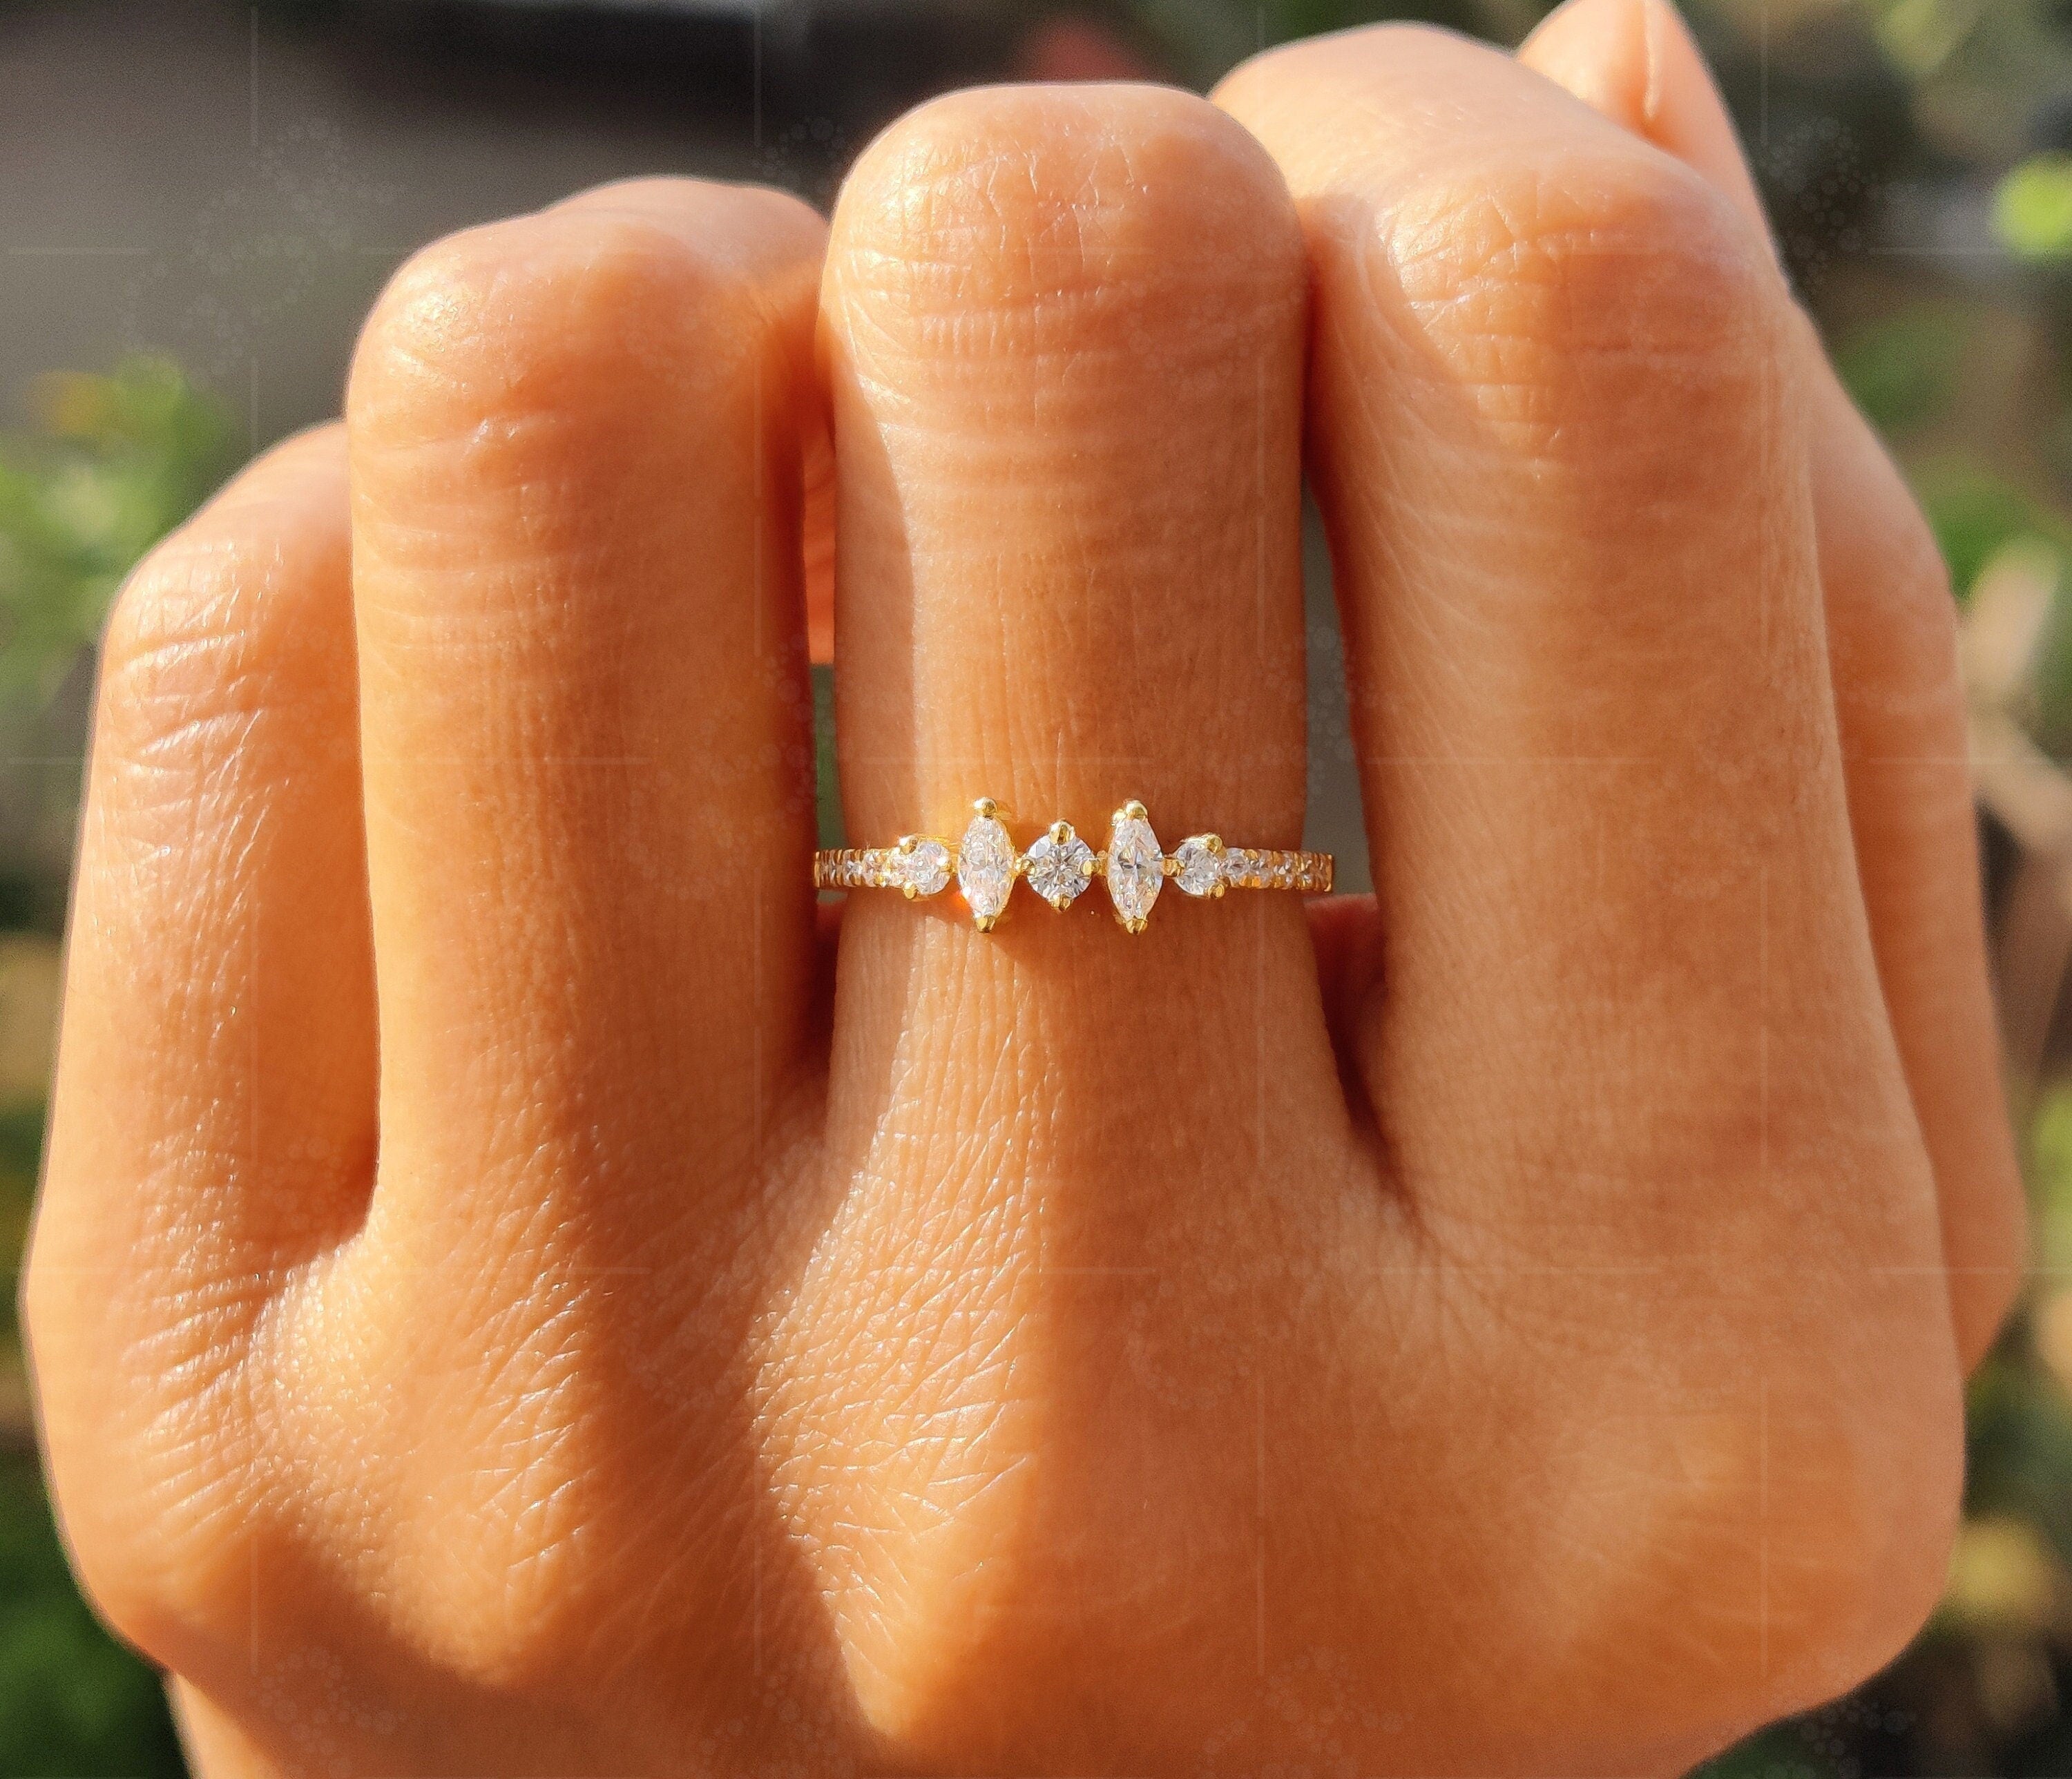 Timeless Elegance: Silver and Gold Dainty Stacking Ring, the Perfect Stackable Wedding Ring with Moissanite Sparkle, a Minimalist Promise of Love and a Beautiful Gift for Her